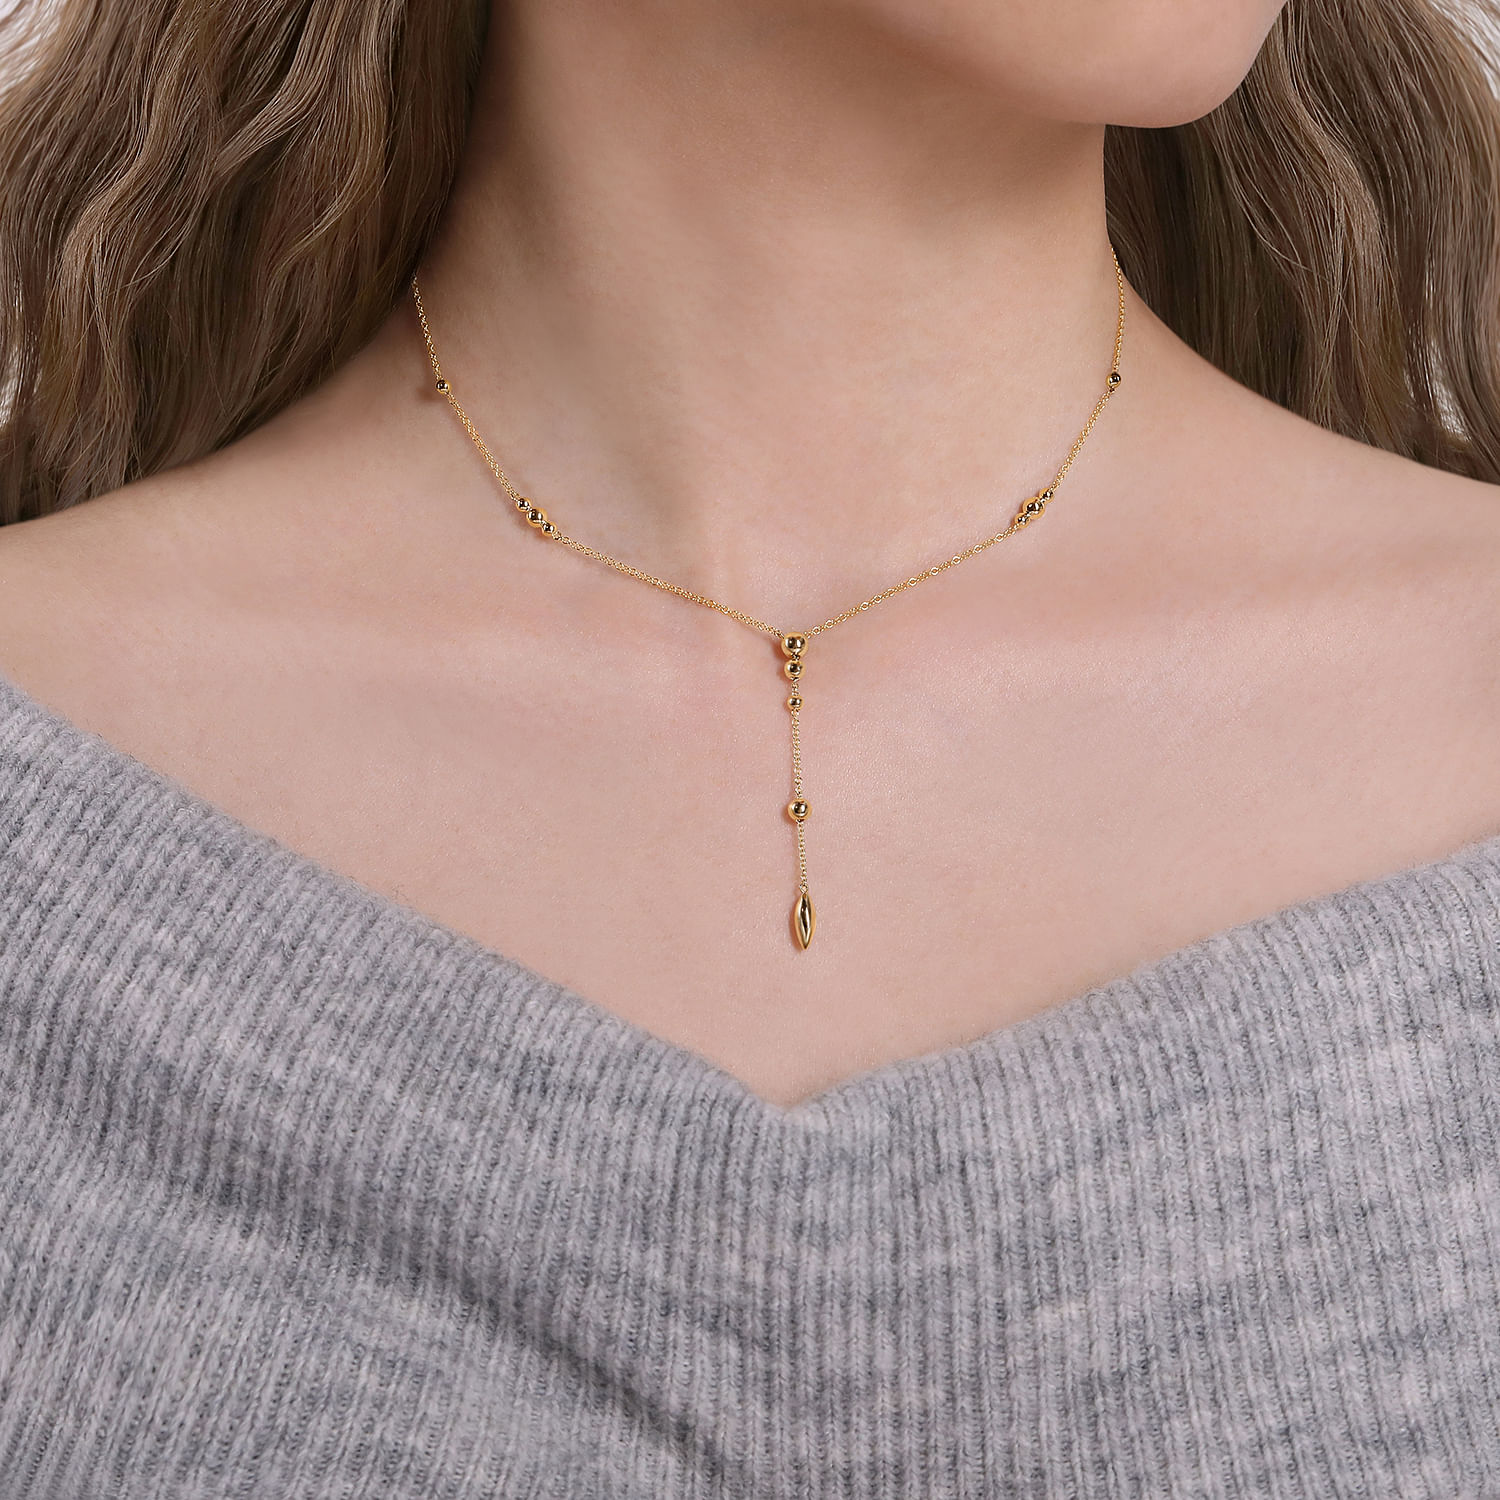 14K Yellow Gold Y Necklace with Bujukan Bead Stations